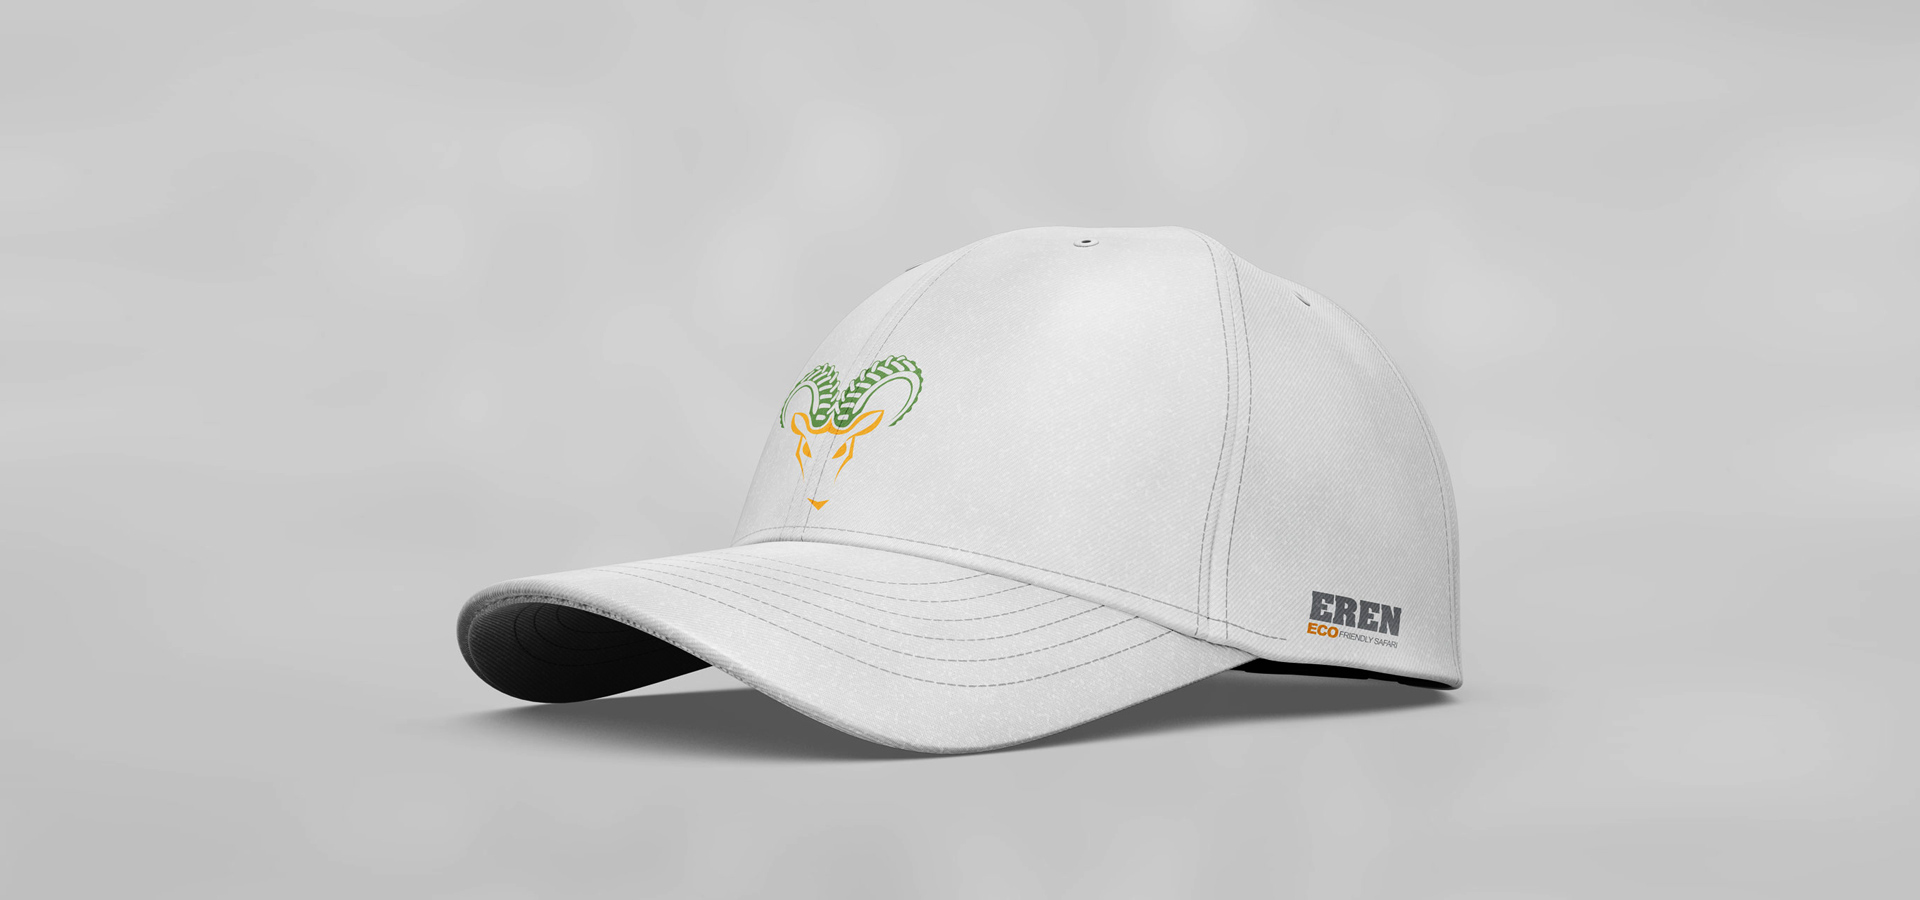 a white cap with our off road logo design for eren